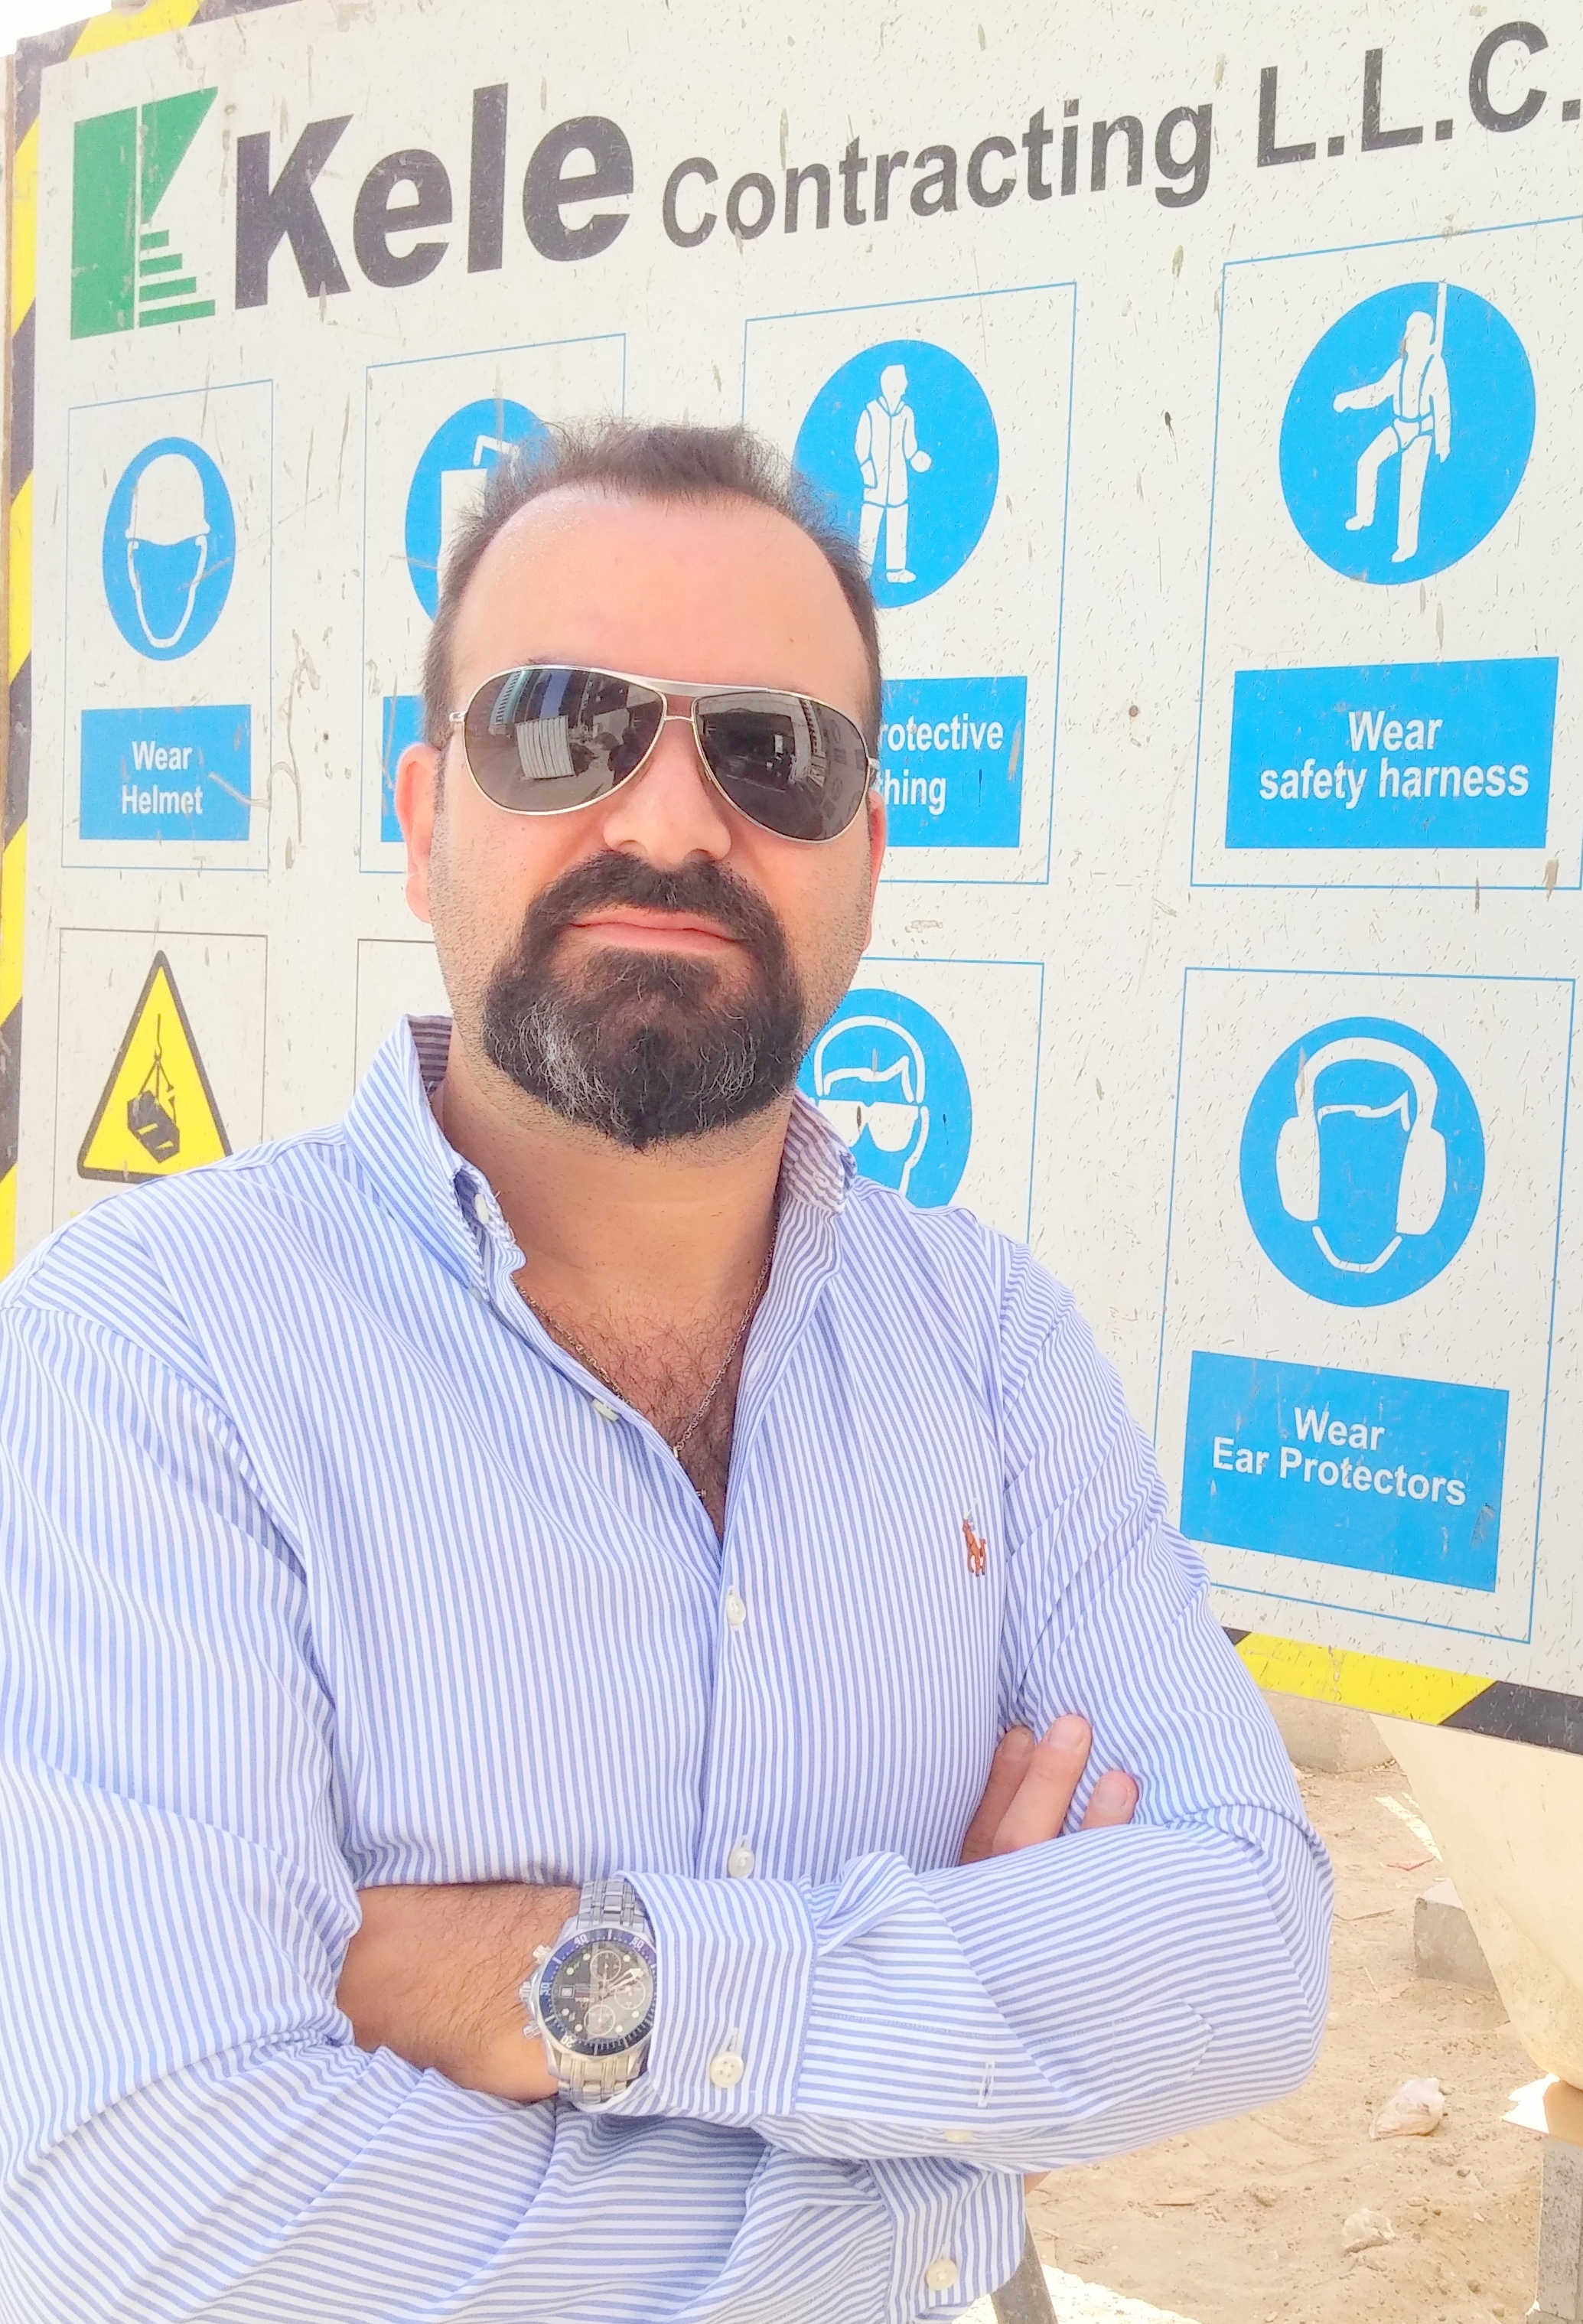 An Interview with Roger Haidar Executive Manager - Procurement & Administration Kele Contracting